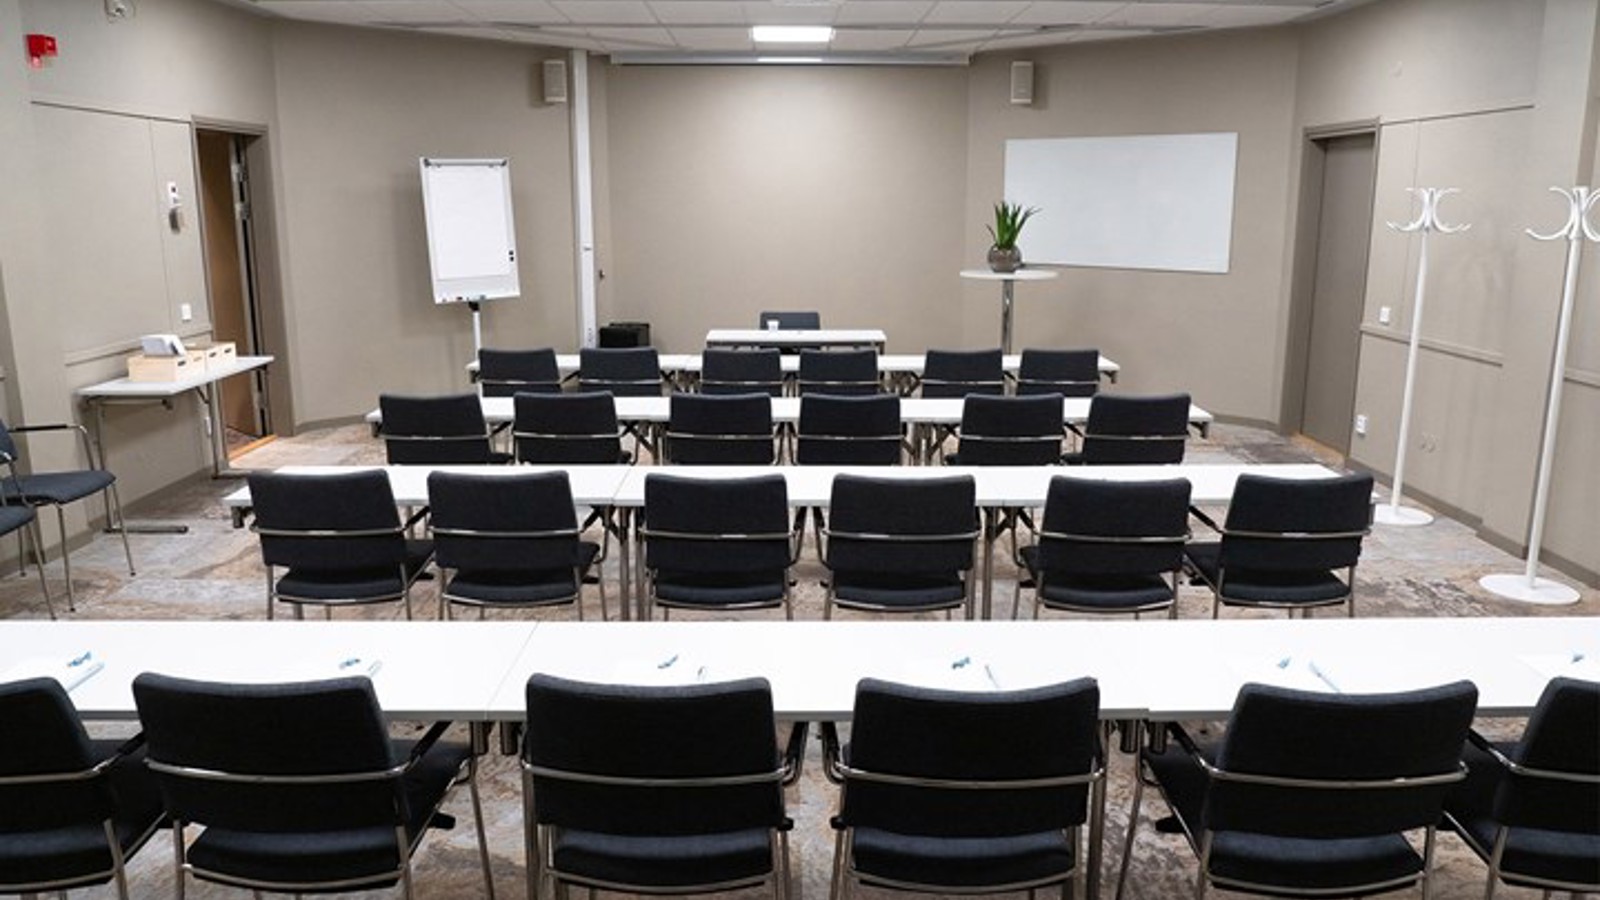 Conference room with lined up chairs and gray walls